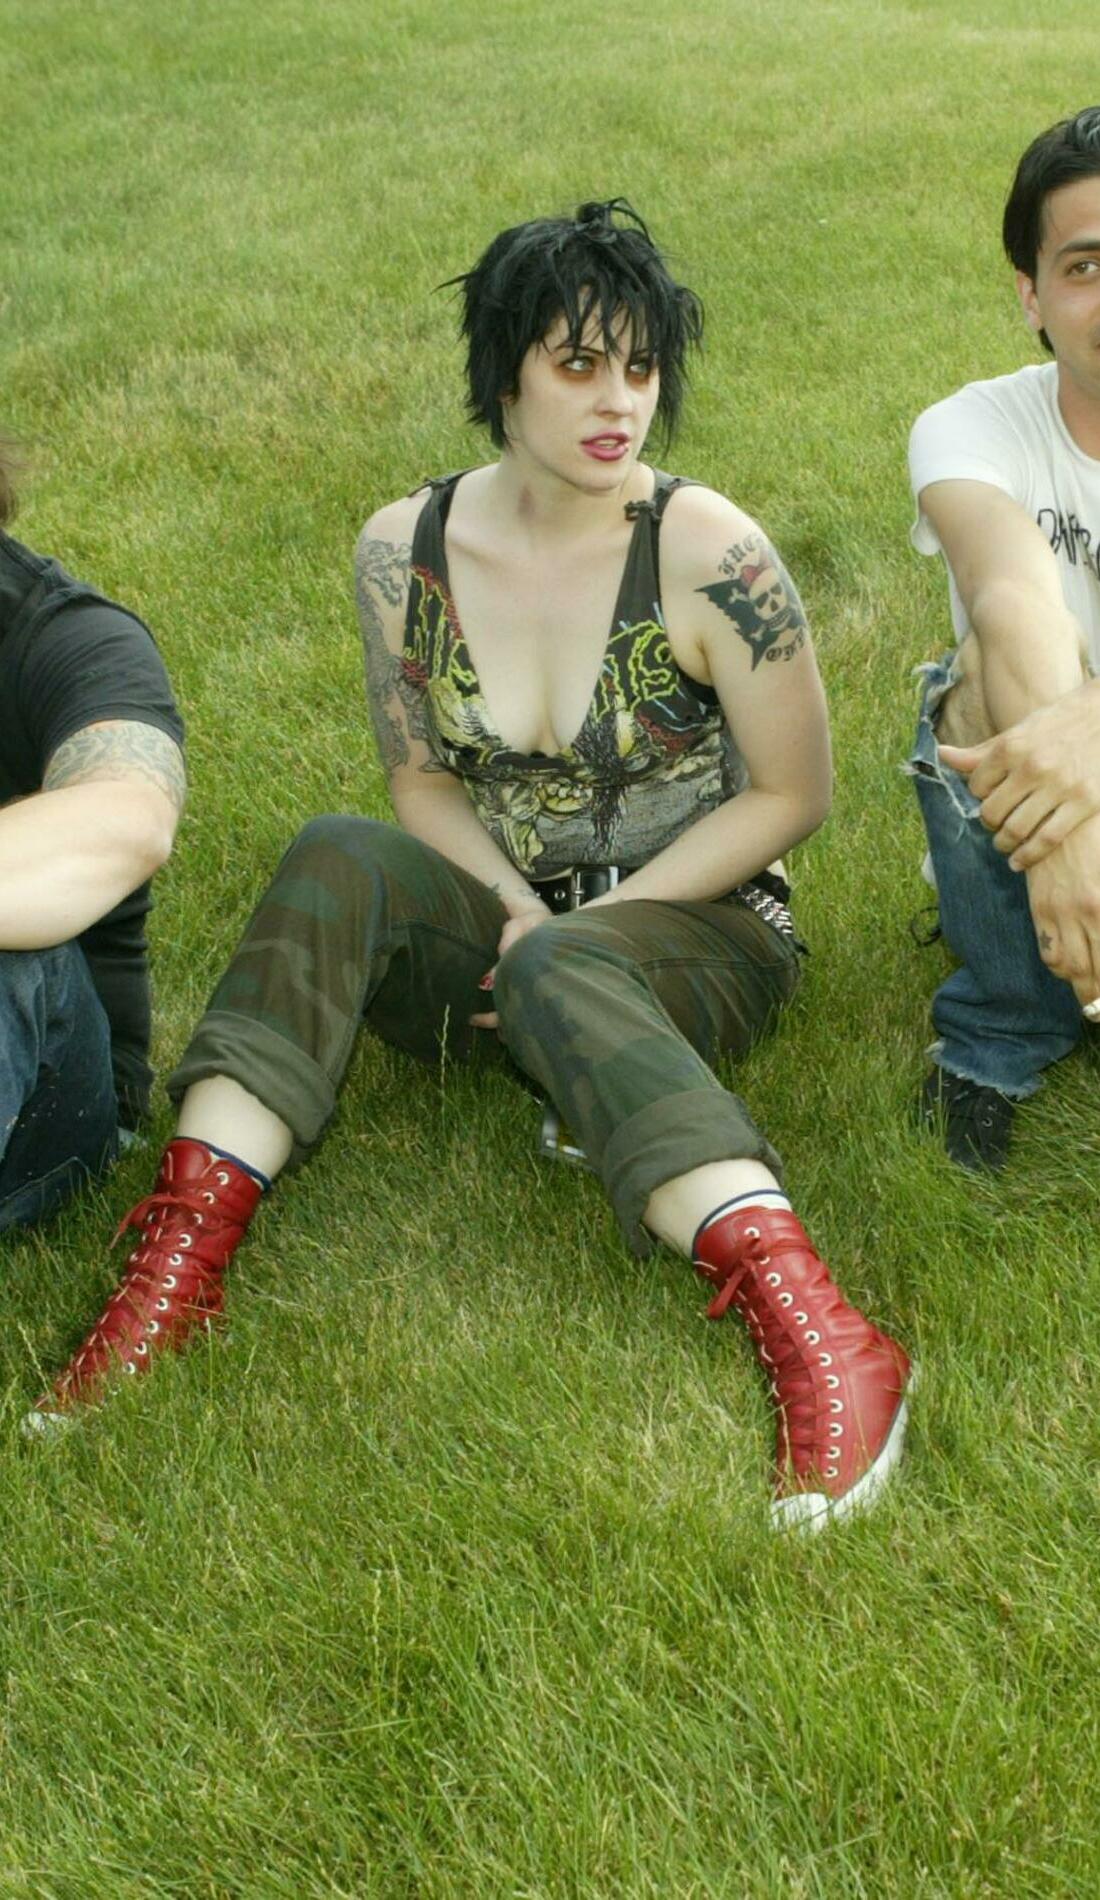 A The Distillers live event